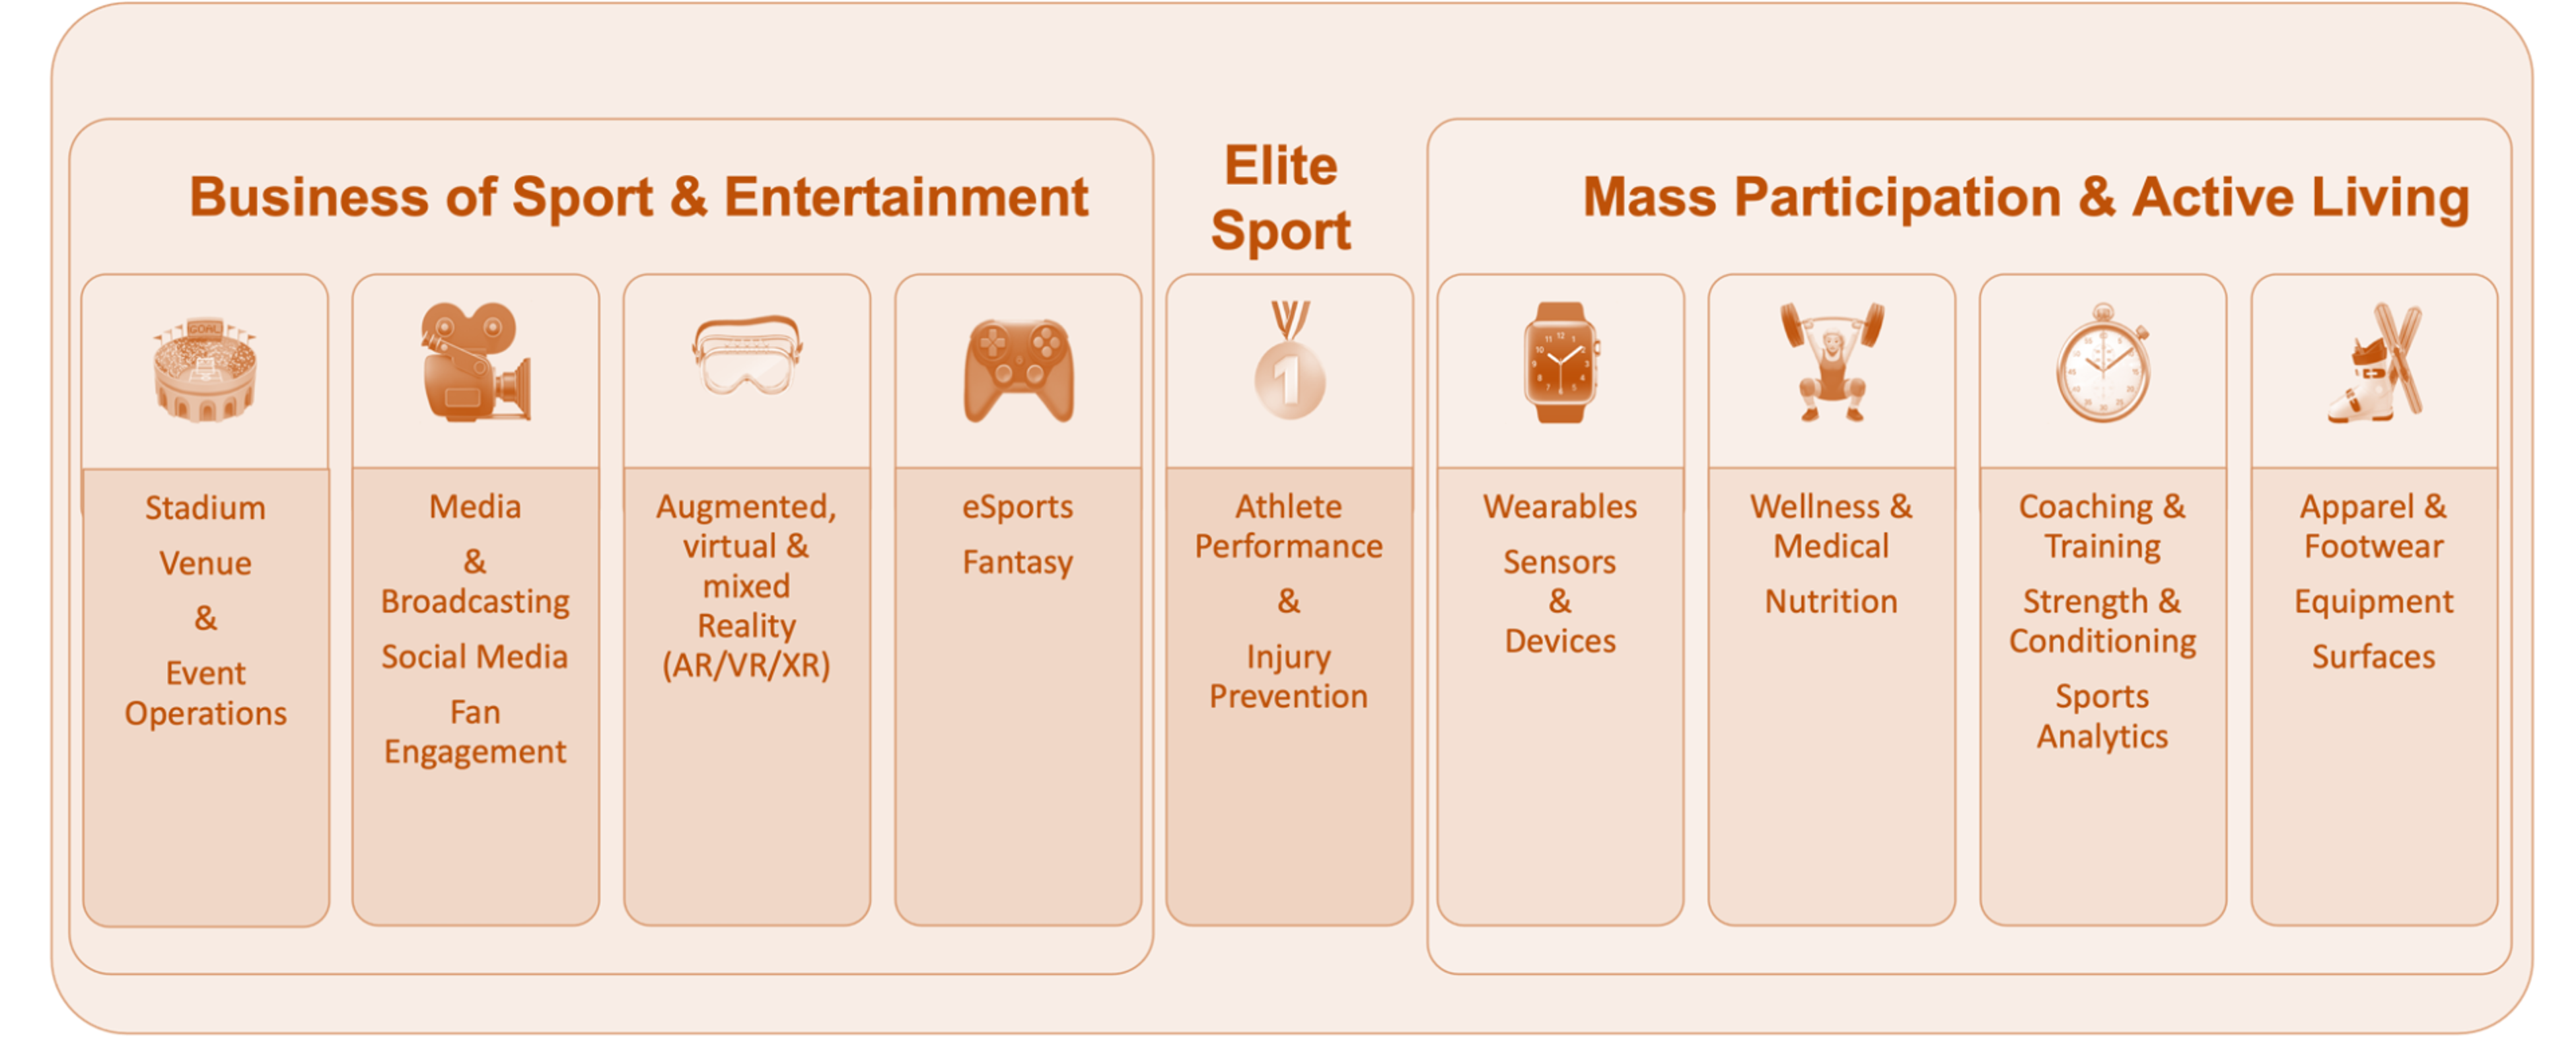 What is sports sechnology